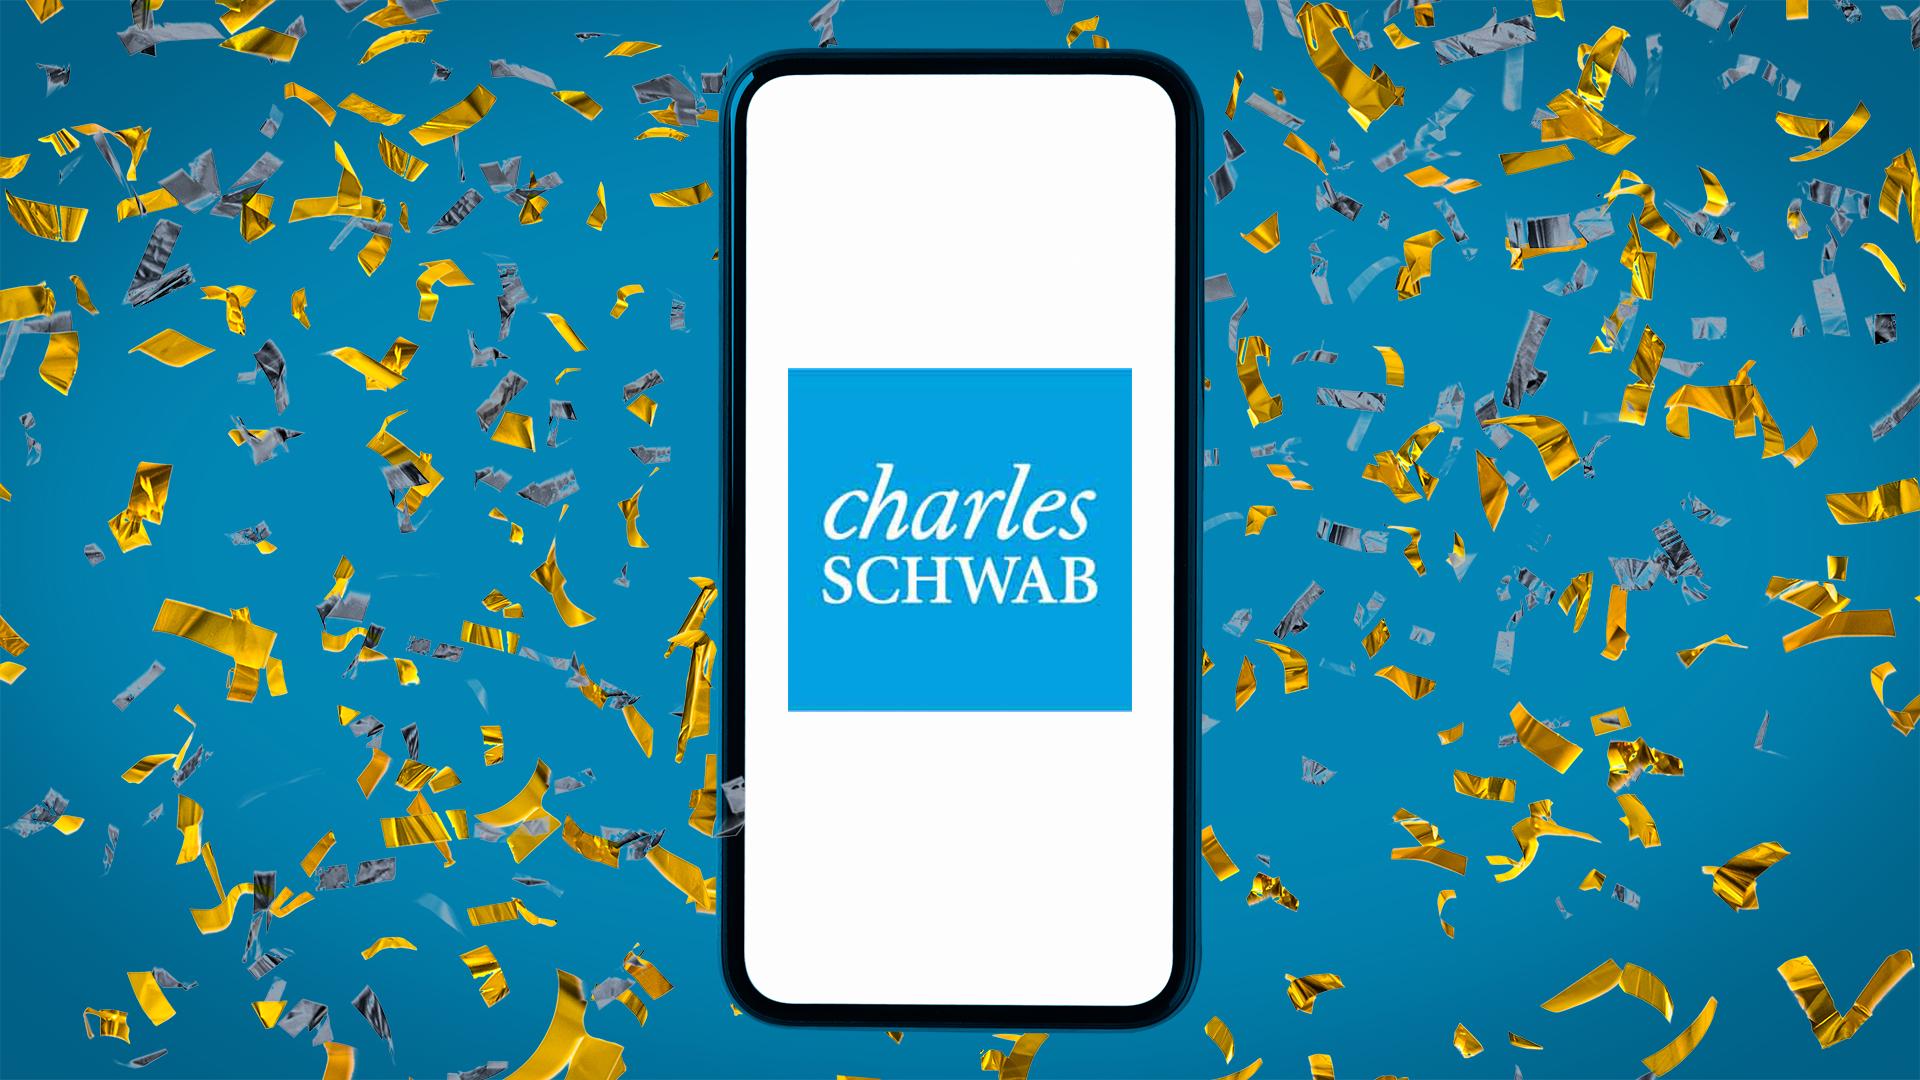 Charles Schwab Promotions:  Present evidence.Cash back for new accounts